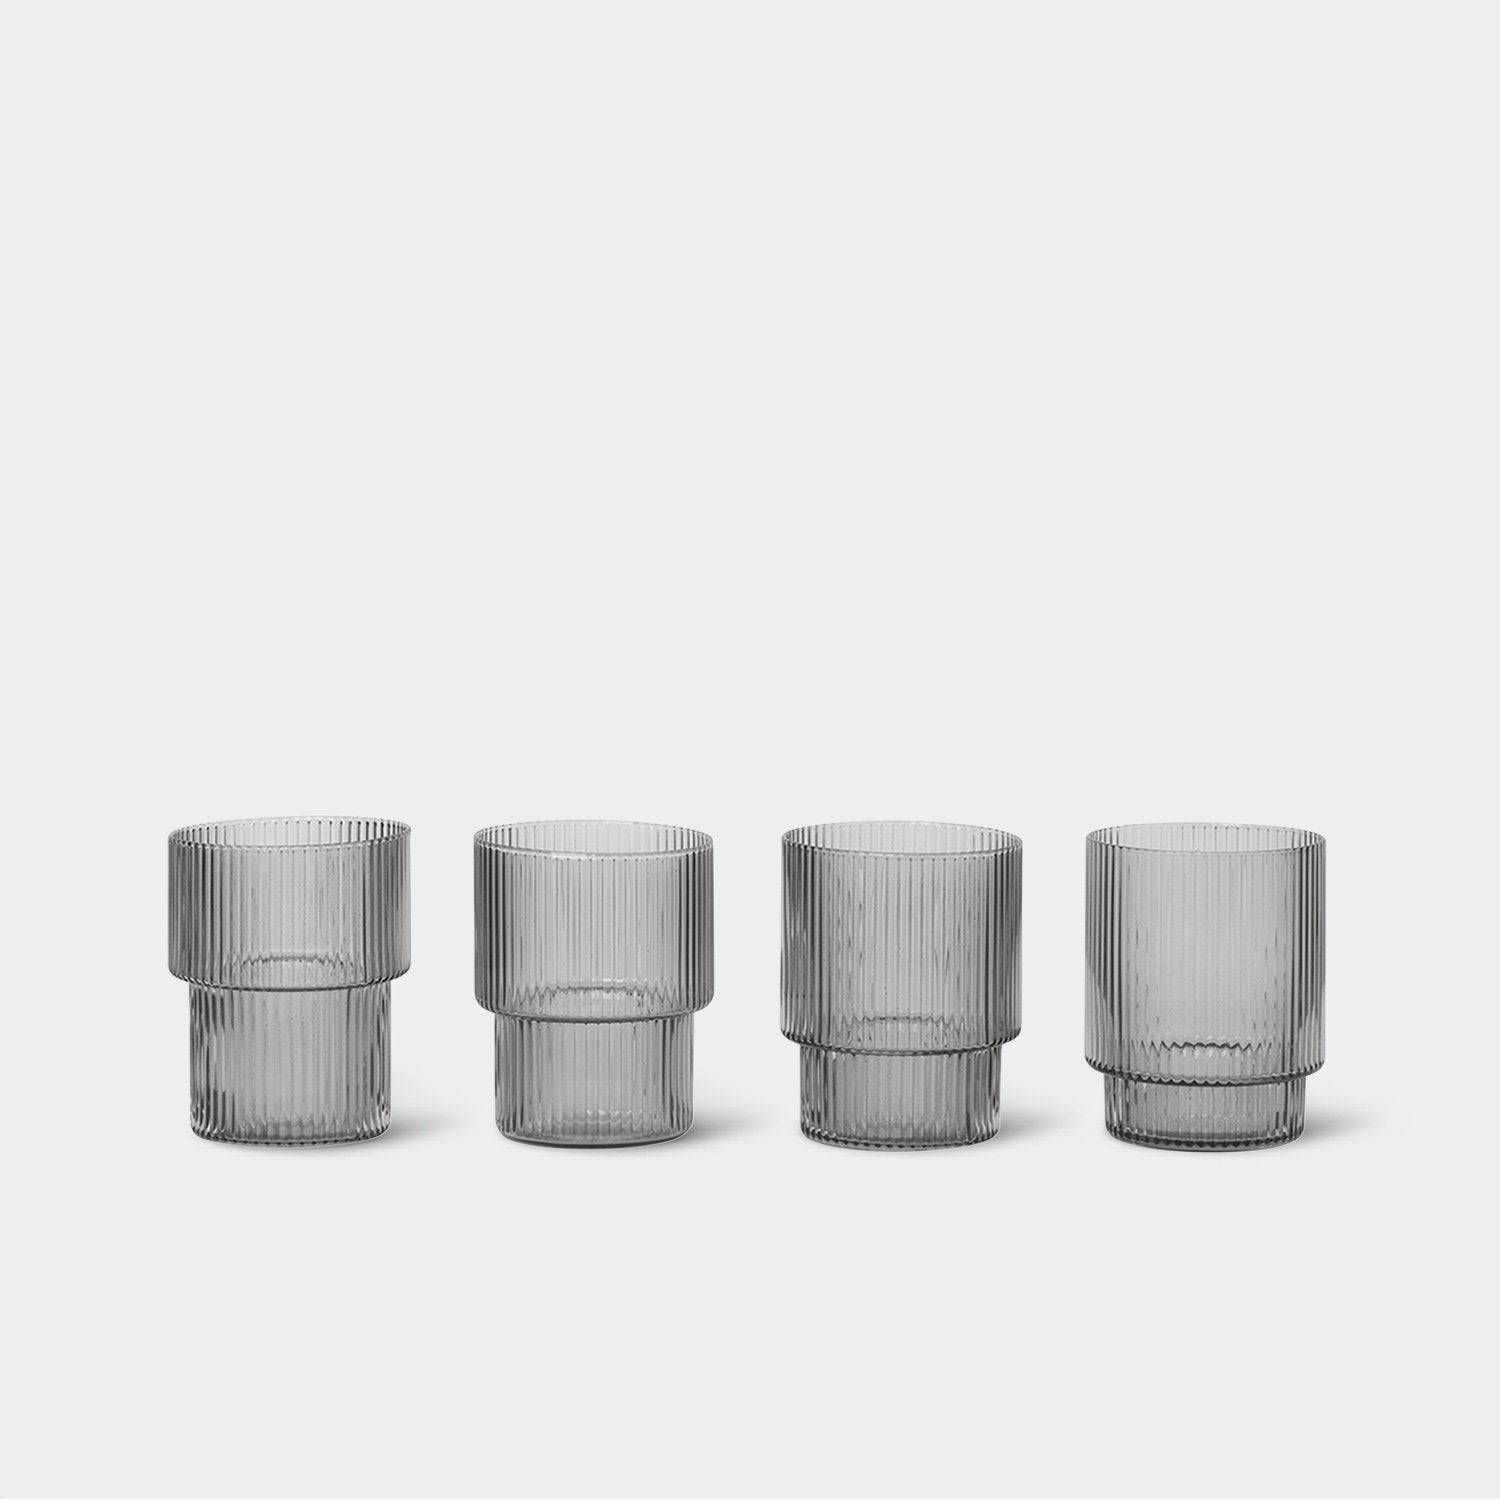 Ferm Living Ripple Glasses in Smoked Grey, Set of 4 - KANSO